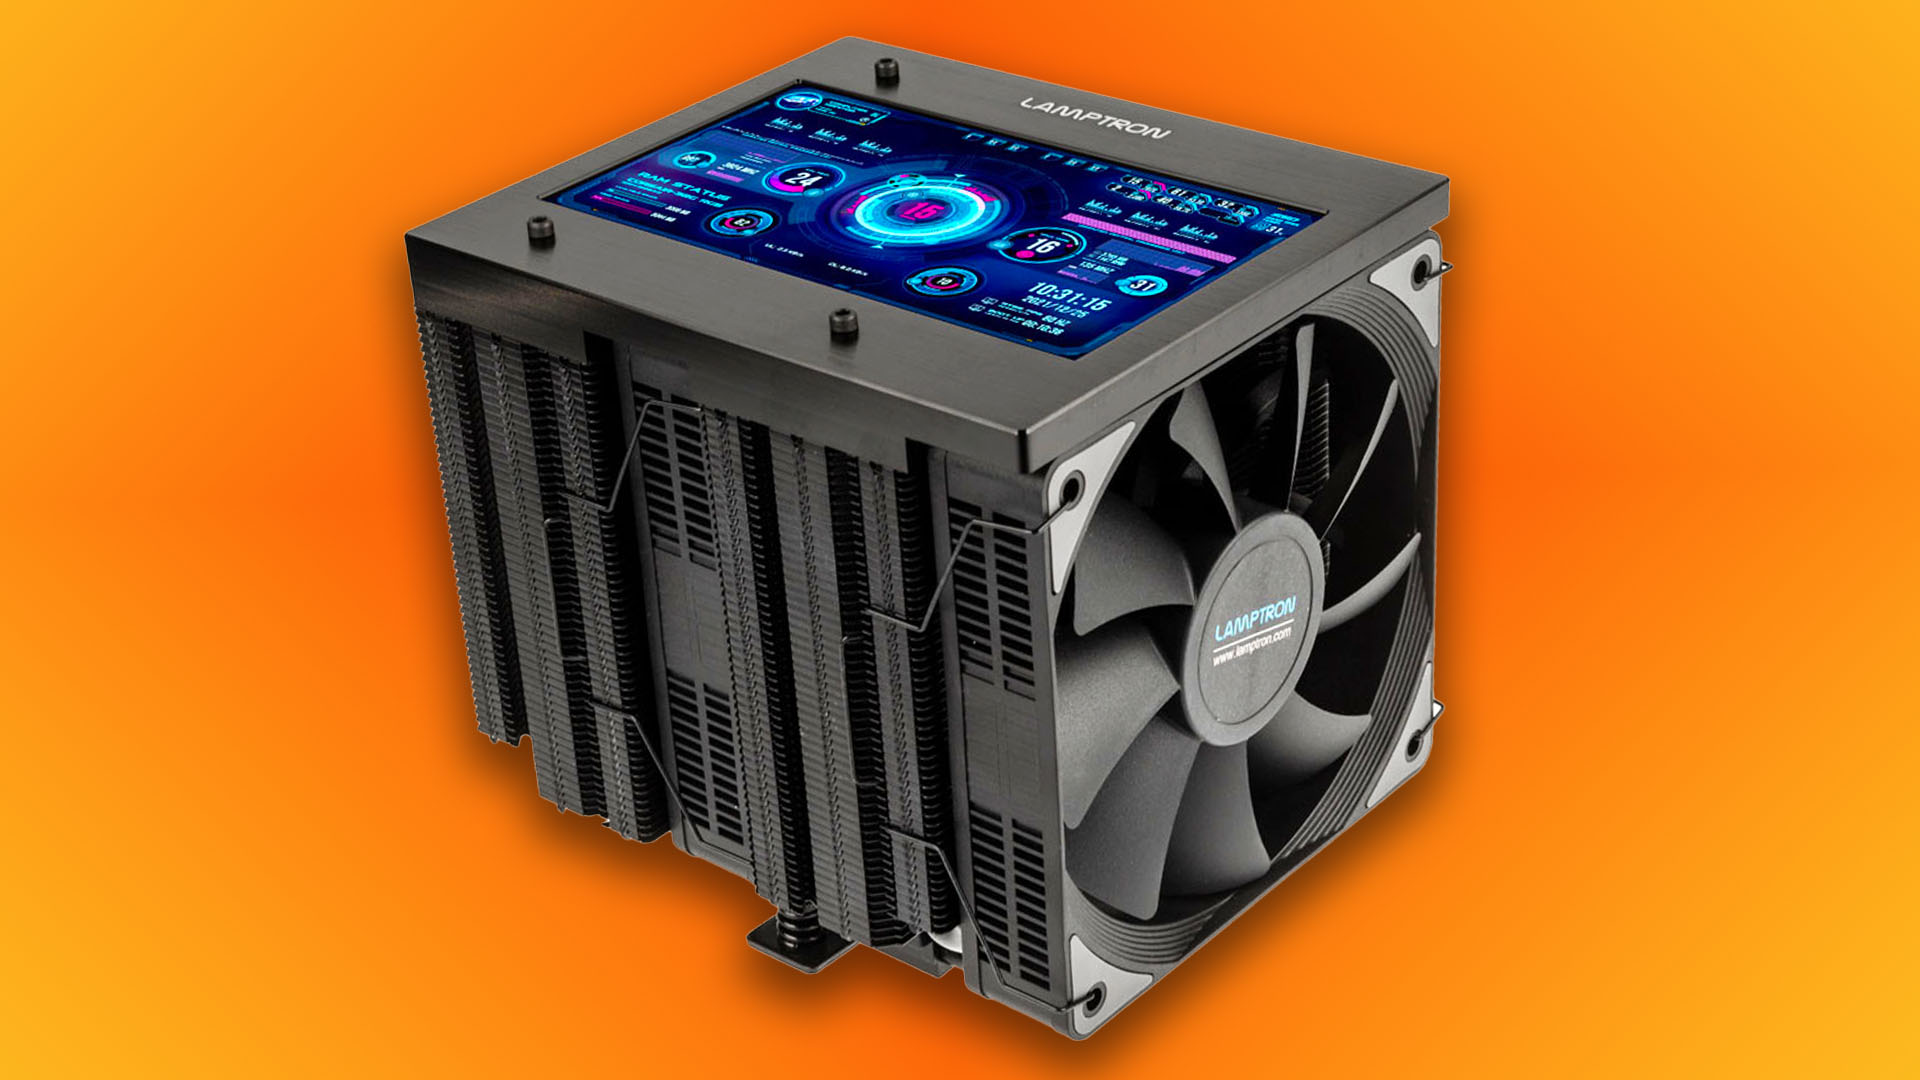 This CPU cooler costs more than a GPU, but it does have a screen